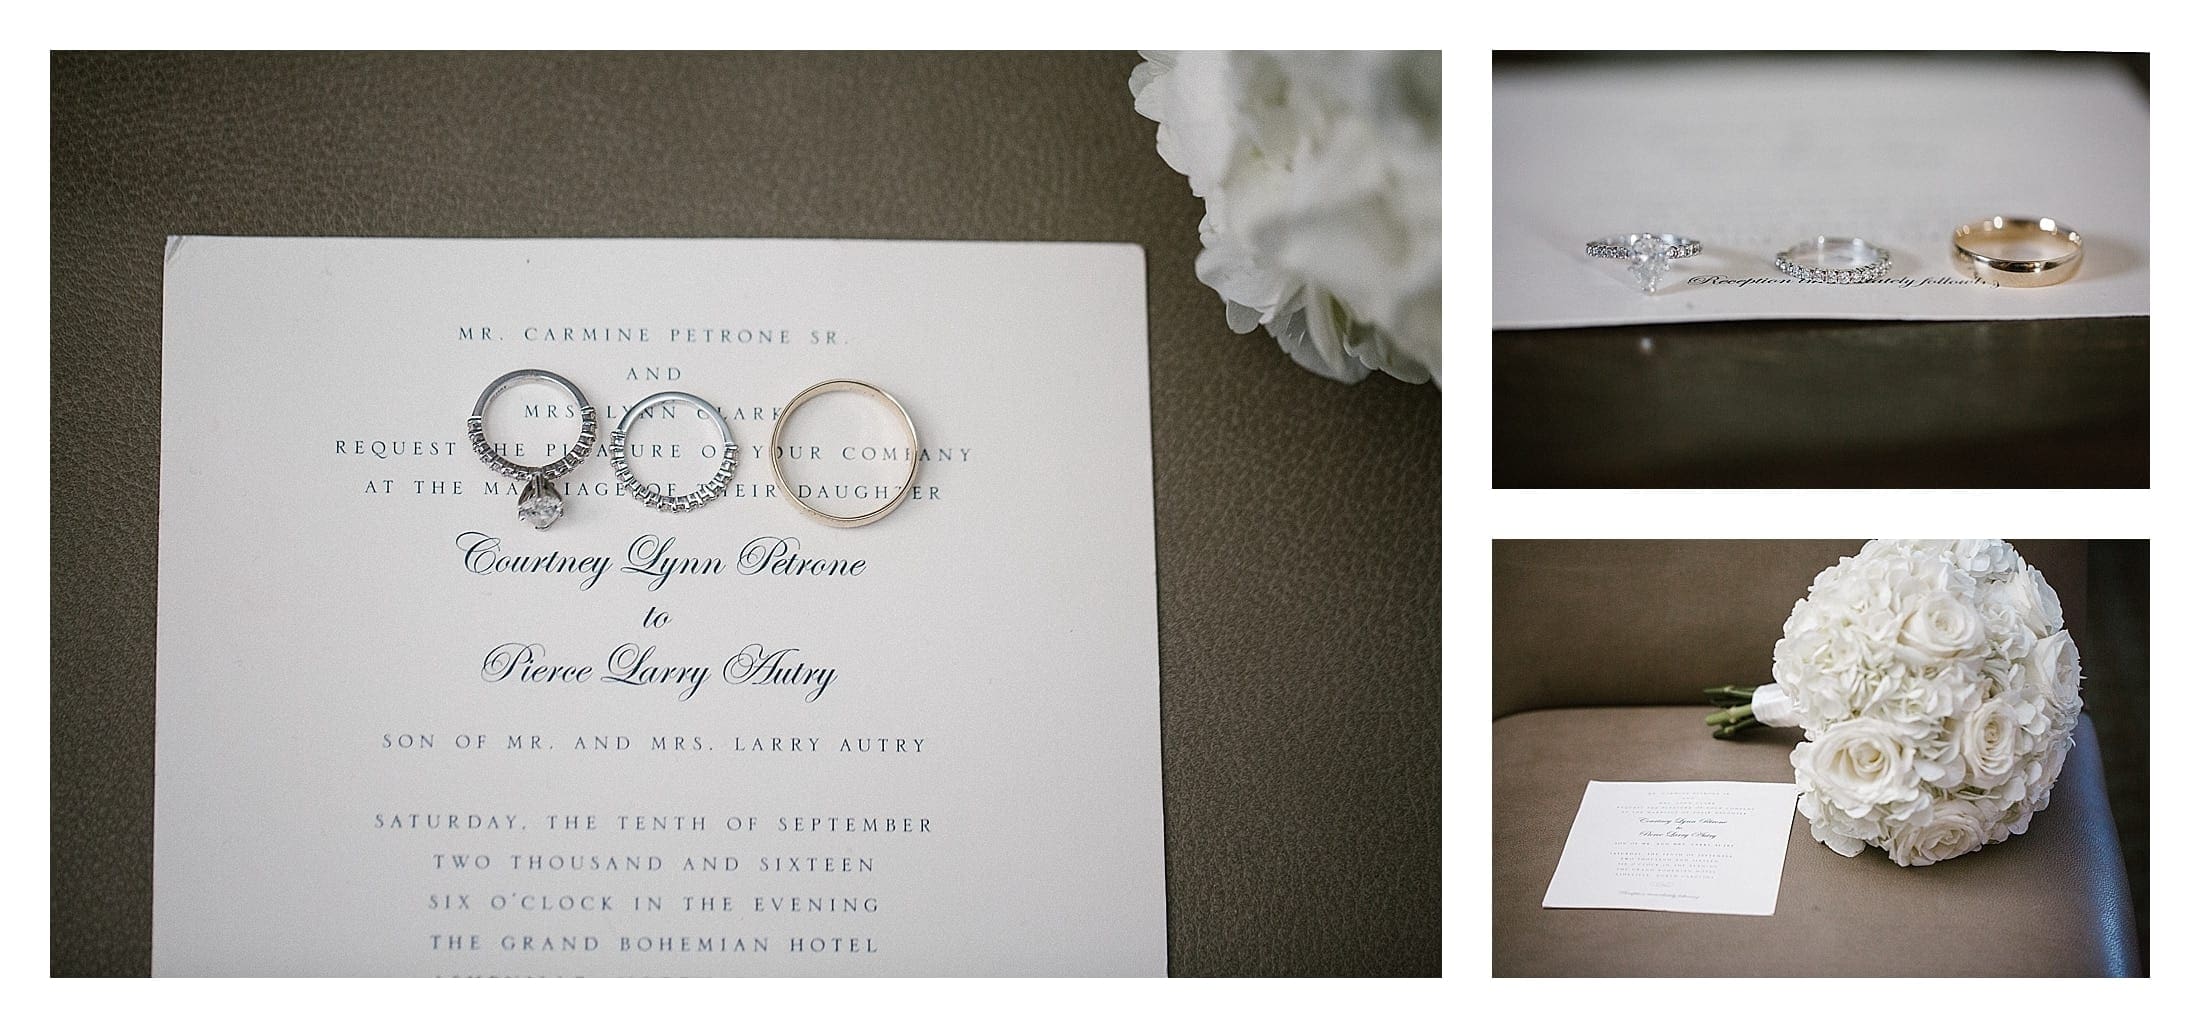 Invitation and rings taken at Asheville Wedding by Kathy Beaver Photography.